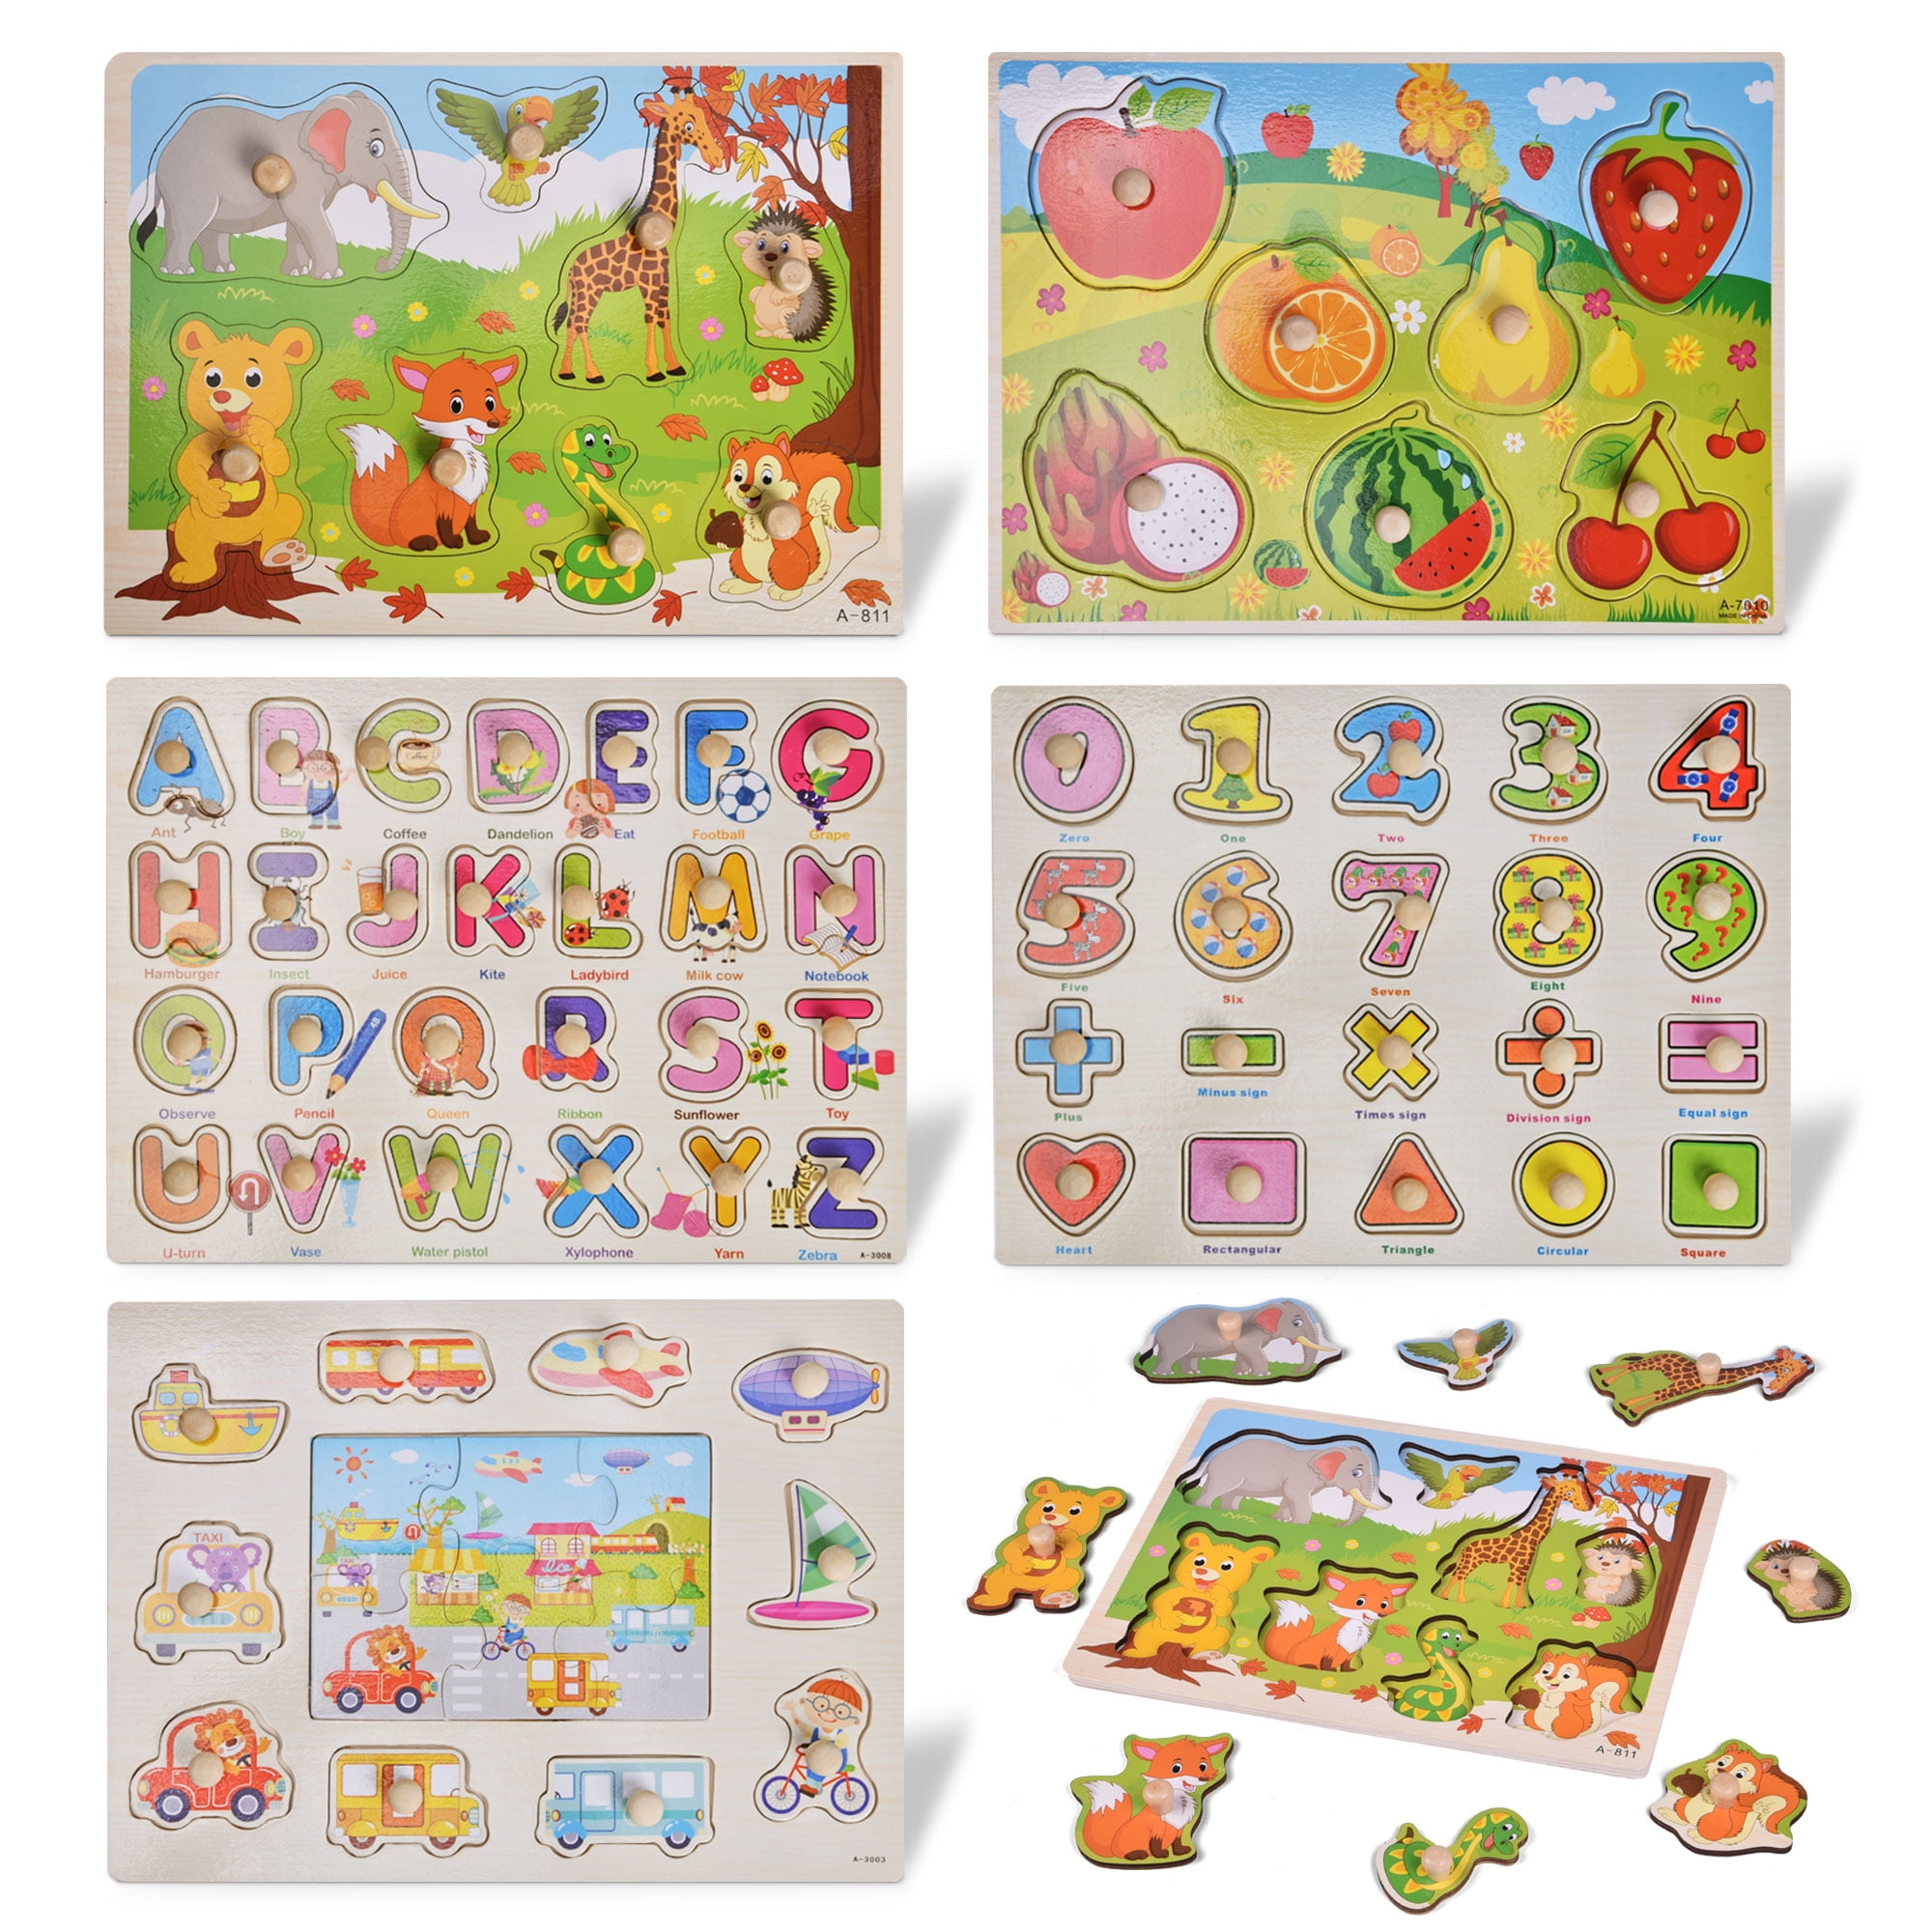 2 Pack Oversized ABC Letters Number Puzzle Set for Kids 1-4 Years Old,Preschool Educational Learning Toys Gift for Boys and Girls Wooden Alphabet Number Puzzles for Toddlers 